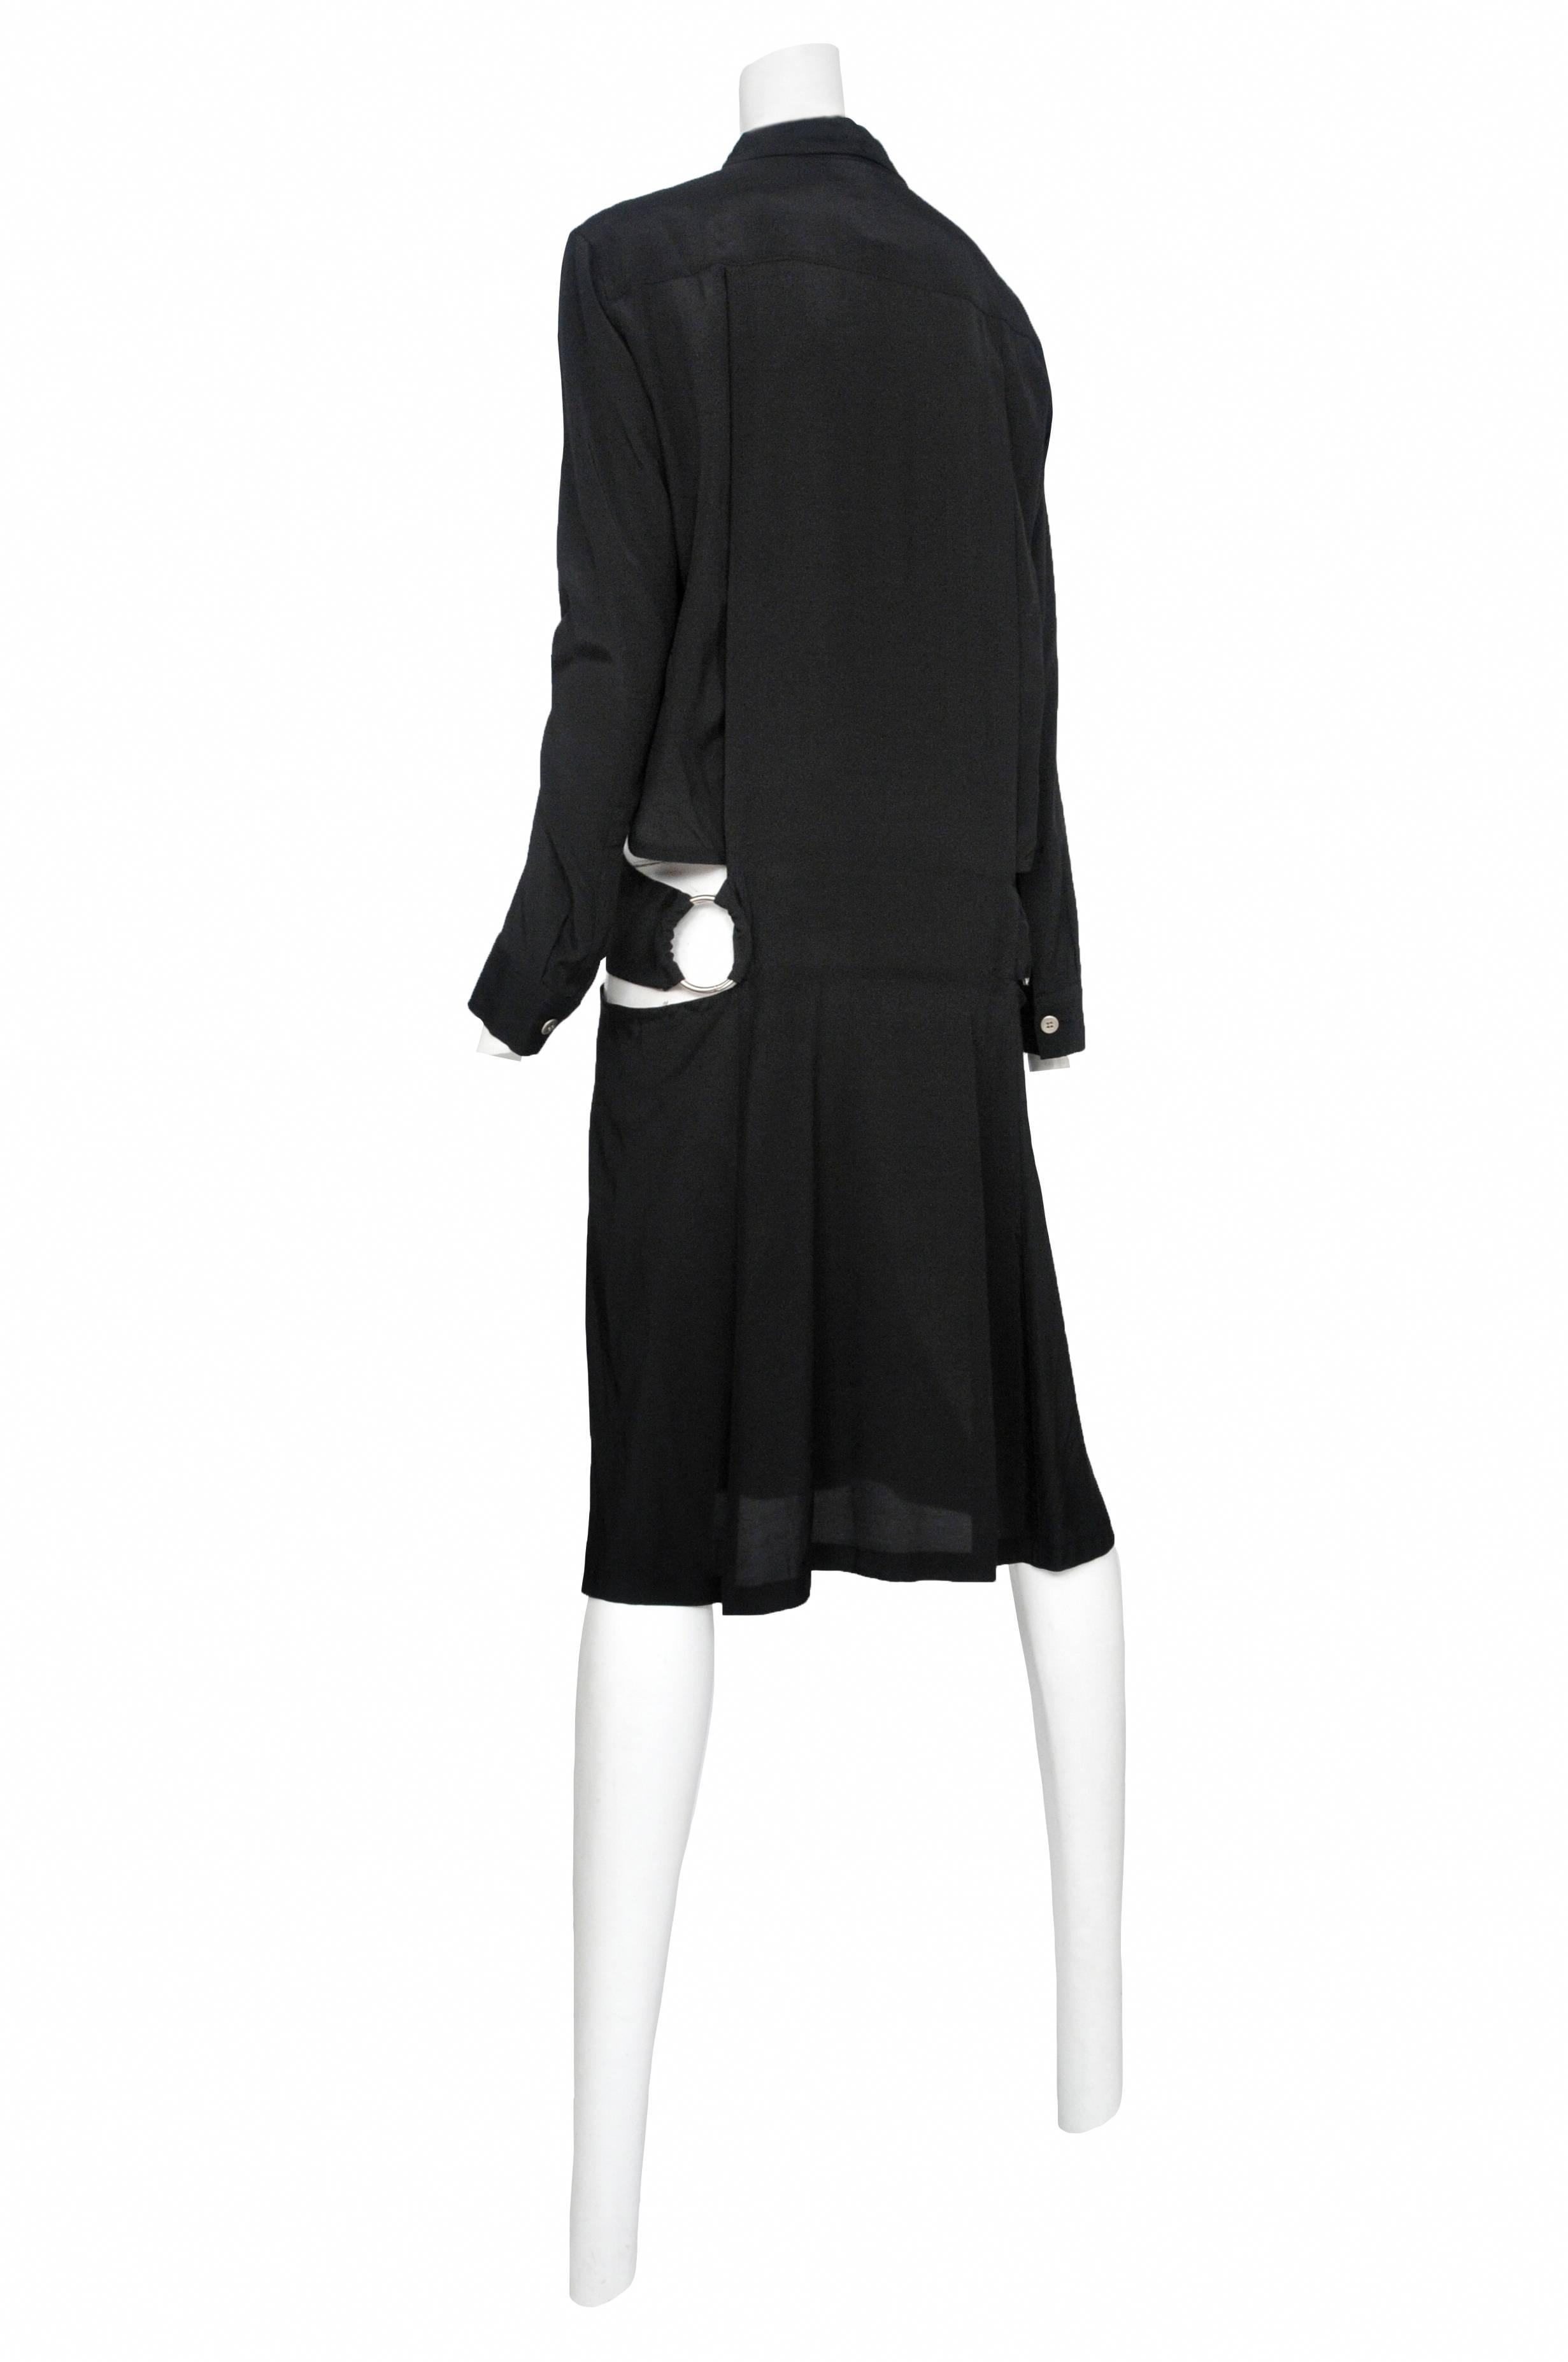 Vintage Yohji Yamamoto black knee length shirt dress featuring white buttons in the center front, cut out details throughout and metal rings toward the back at the waist. 